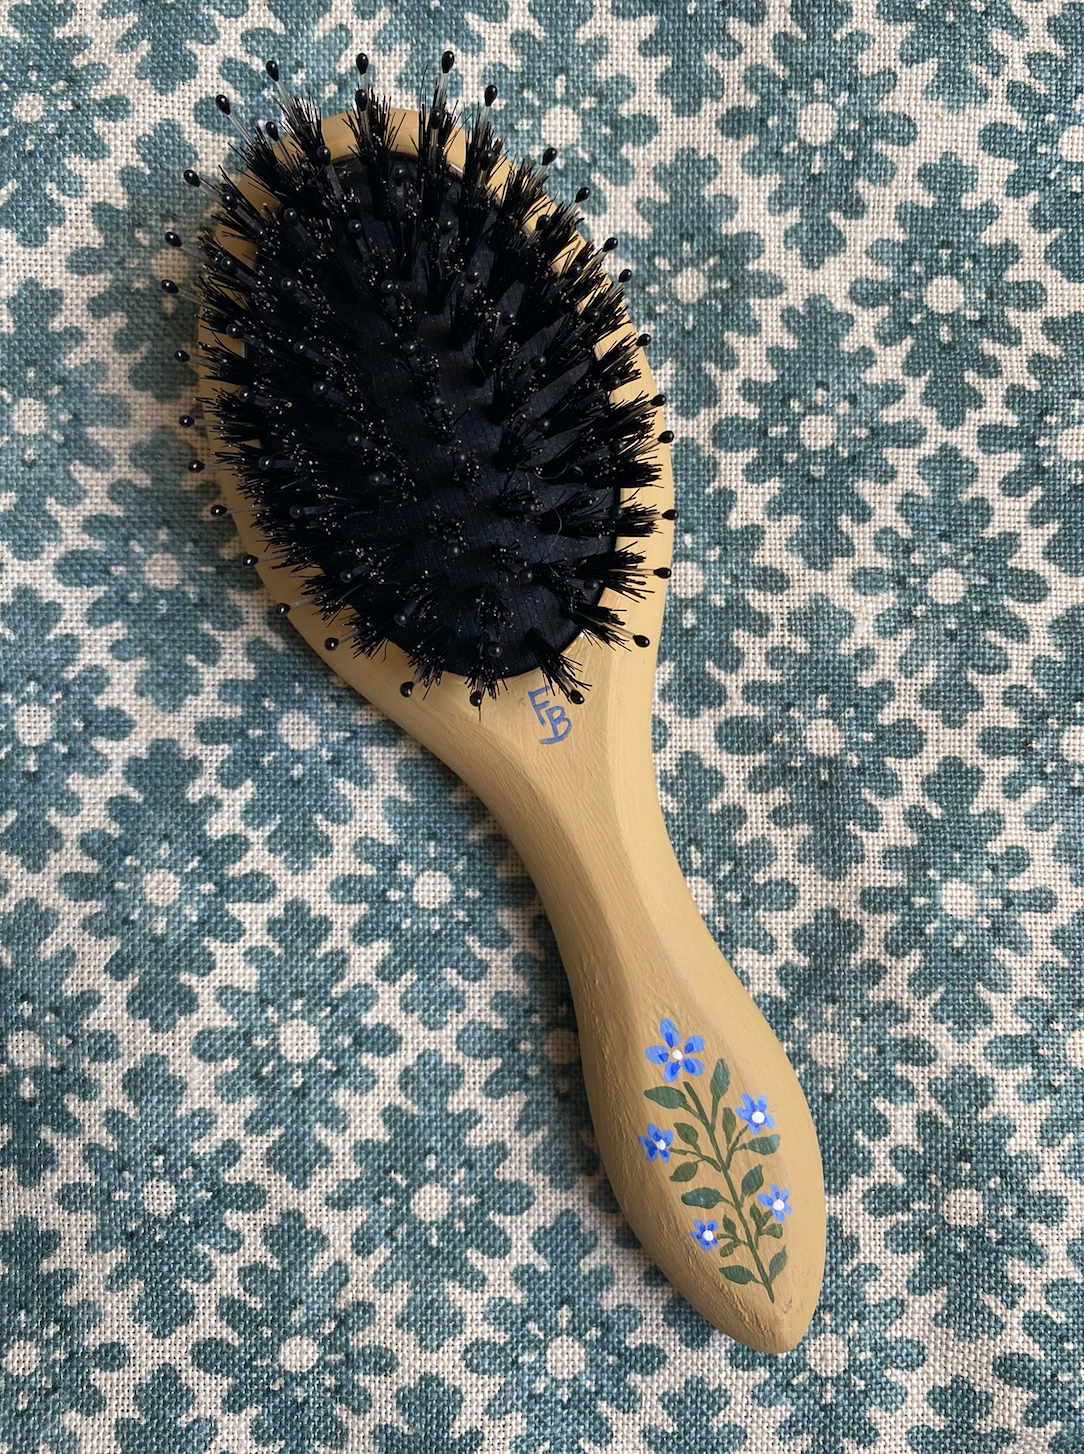 Small hairbrush - Yellow with blue flowers